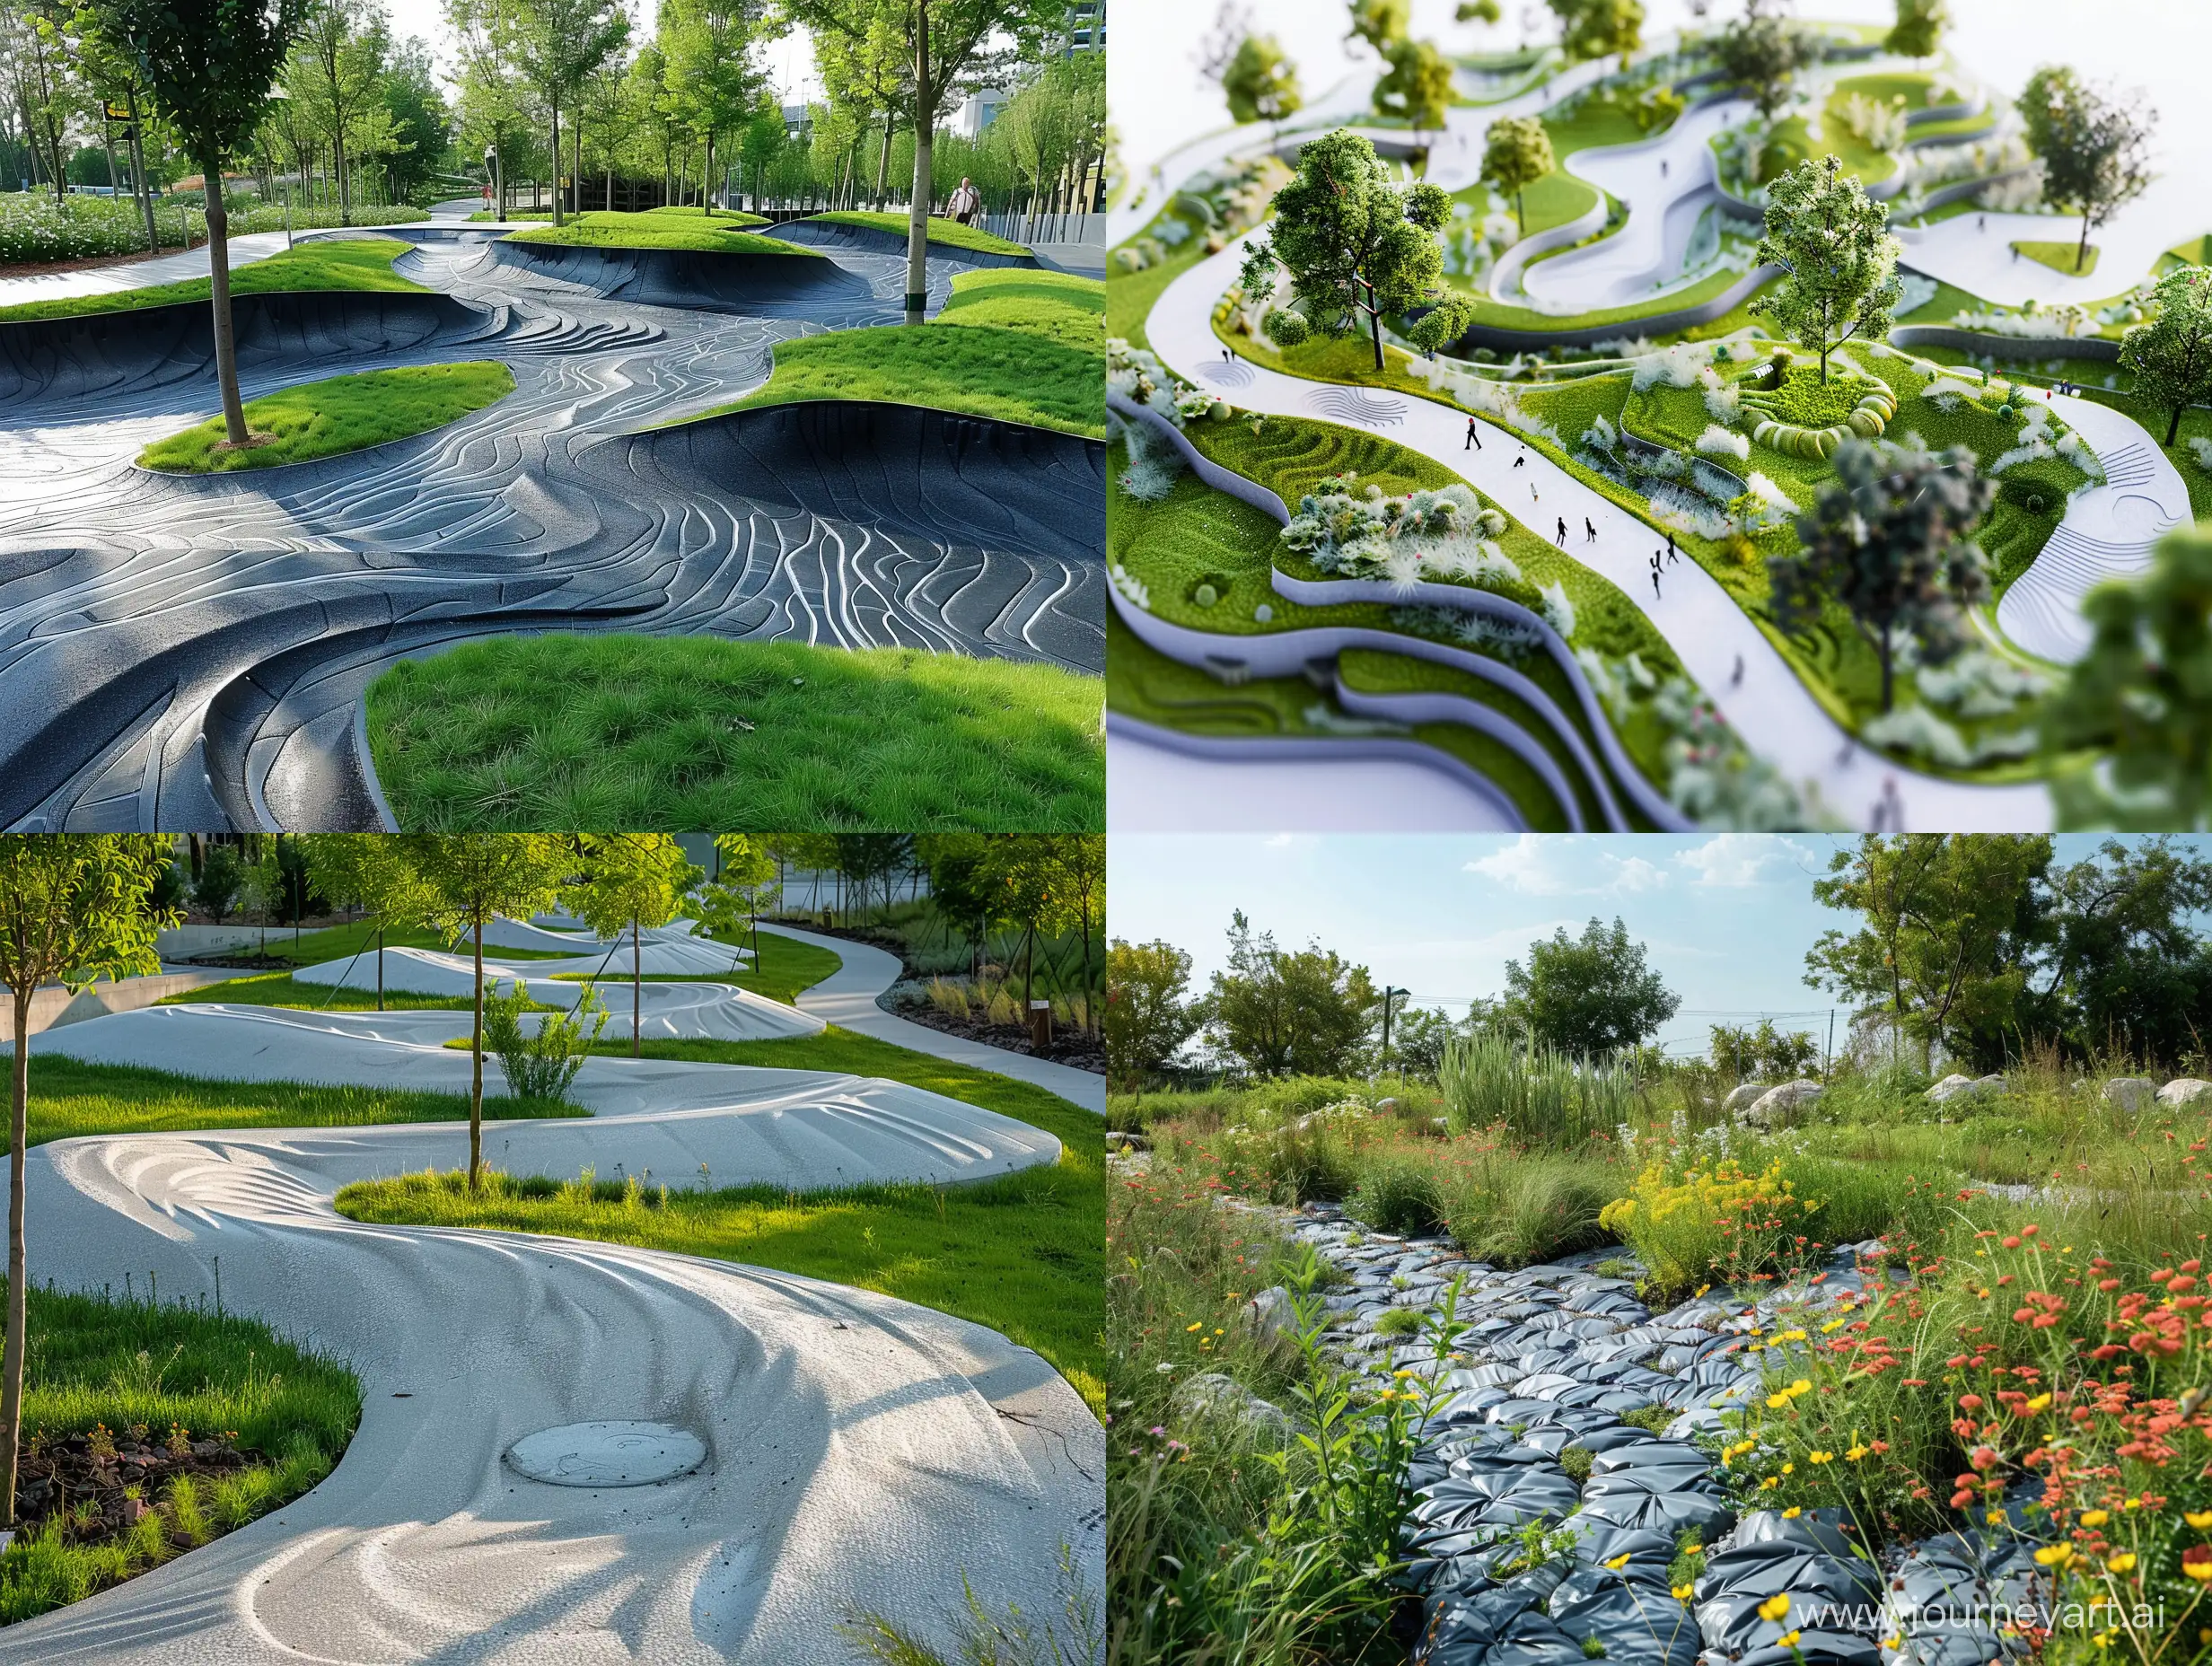 Geoplastic-Forms-in-Landscape-Architecture